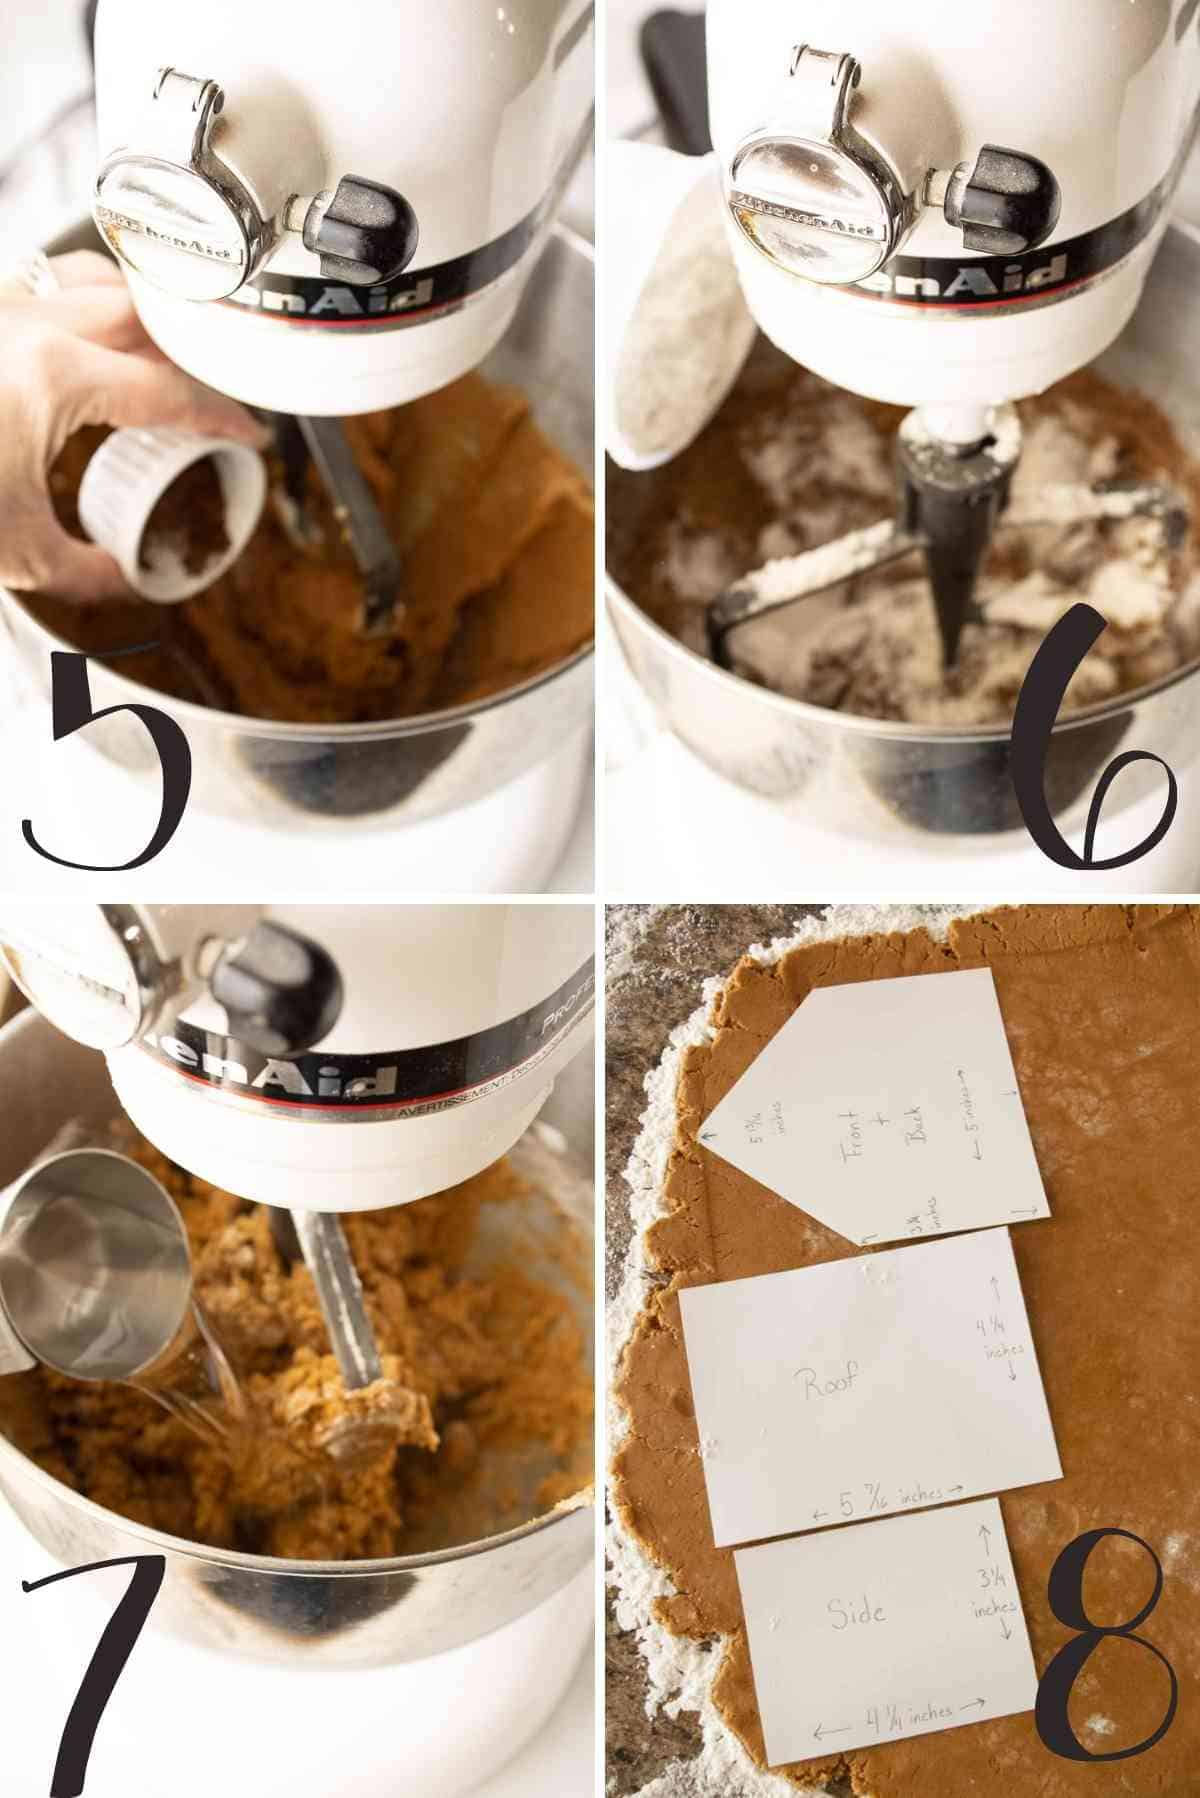 Finish mixing up gingerbread dough, roll out, lay the templates on dough.